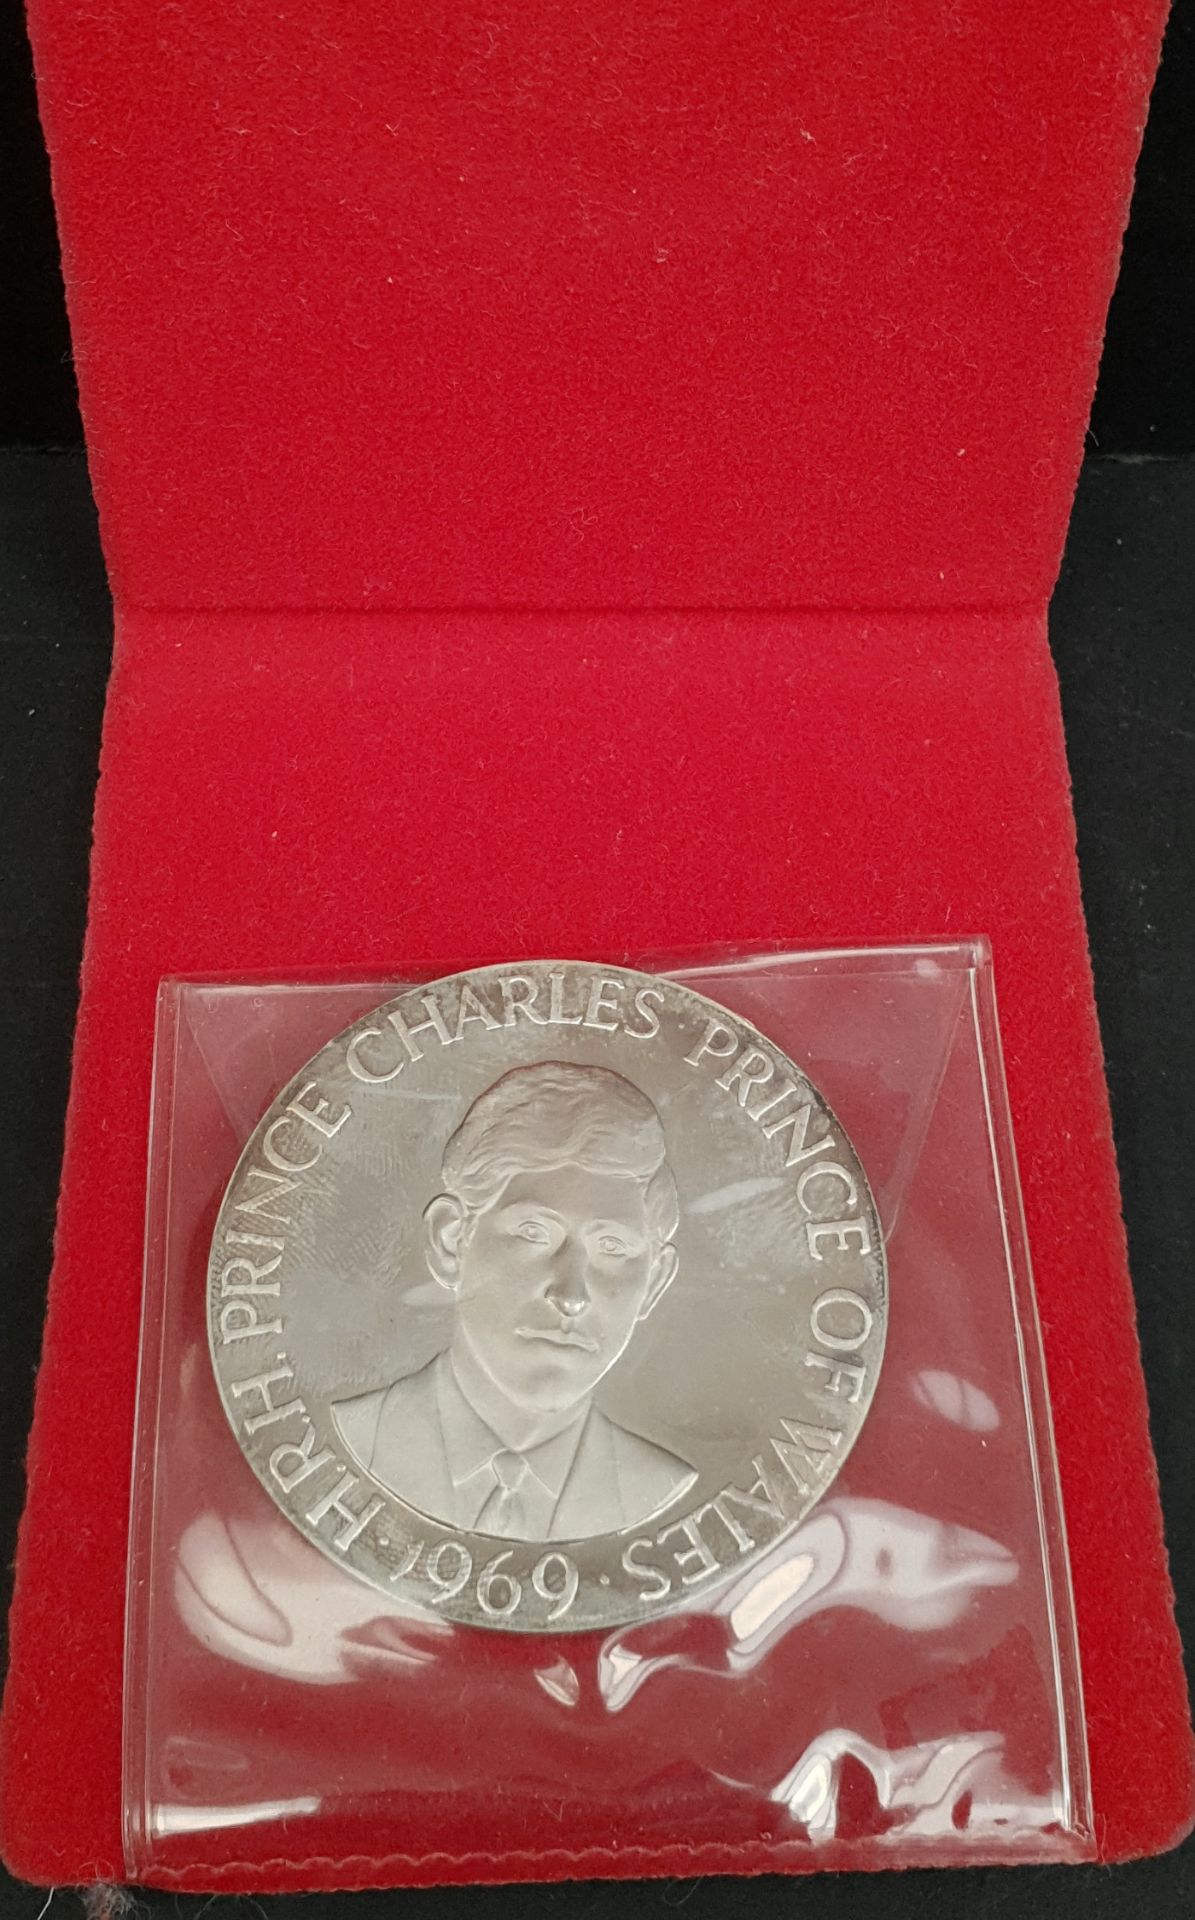 Collectable Coin Sterling Silver Prince Charles Investiture 1969